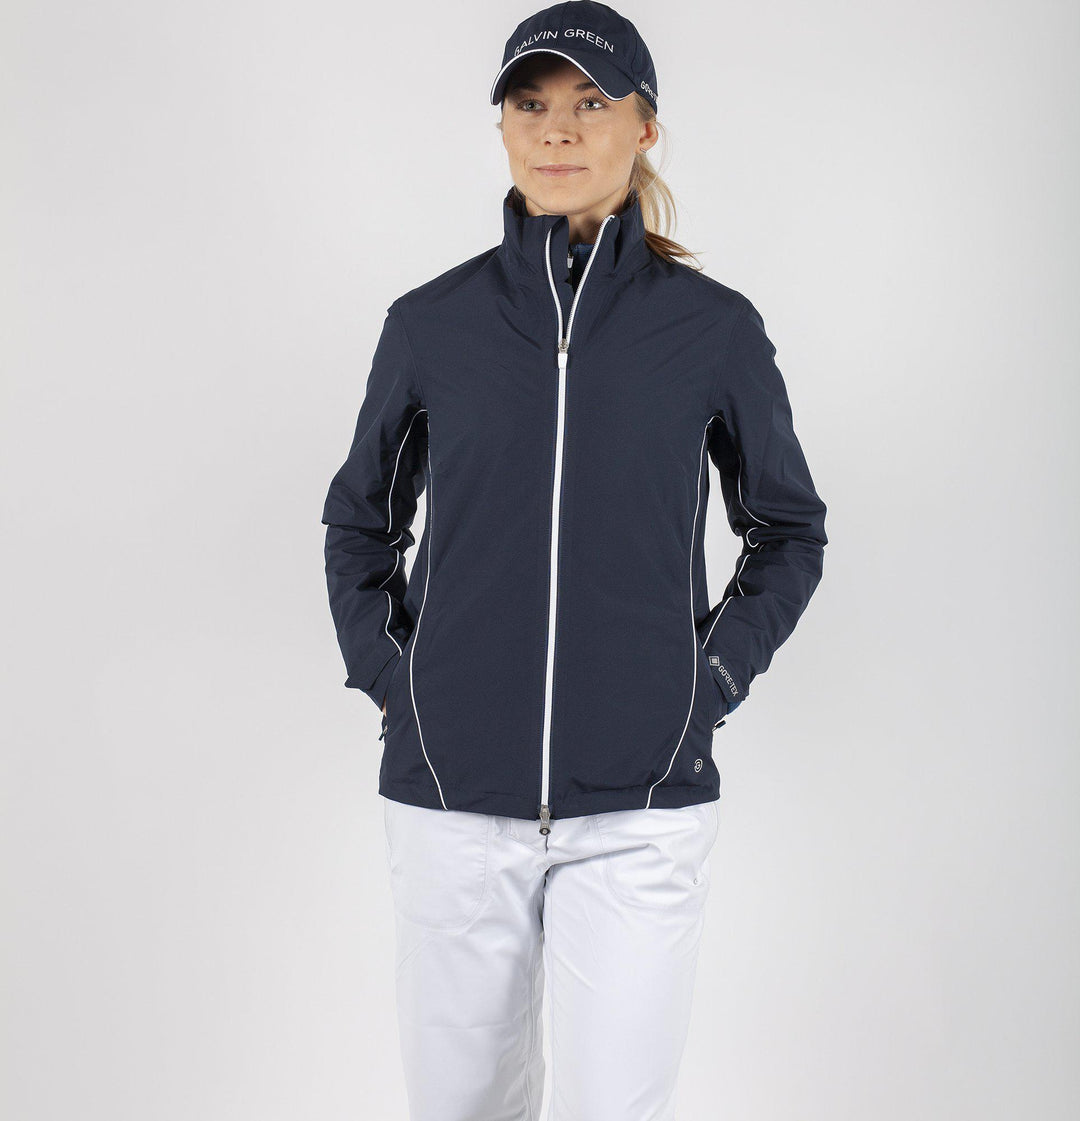 Arissa is a Waterproof jacket for Women in the color Navy(2)